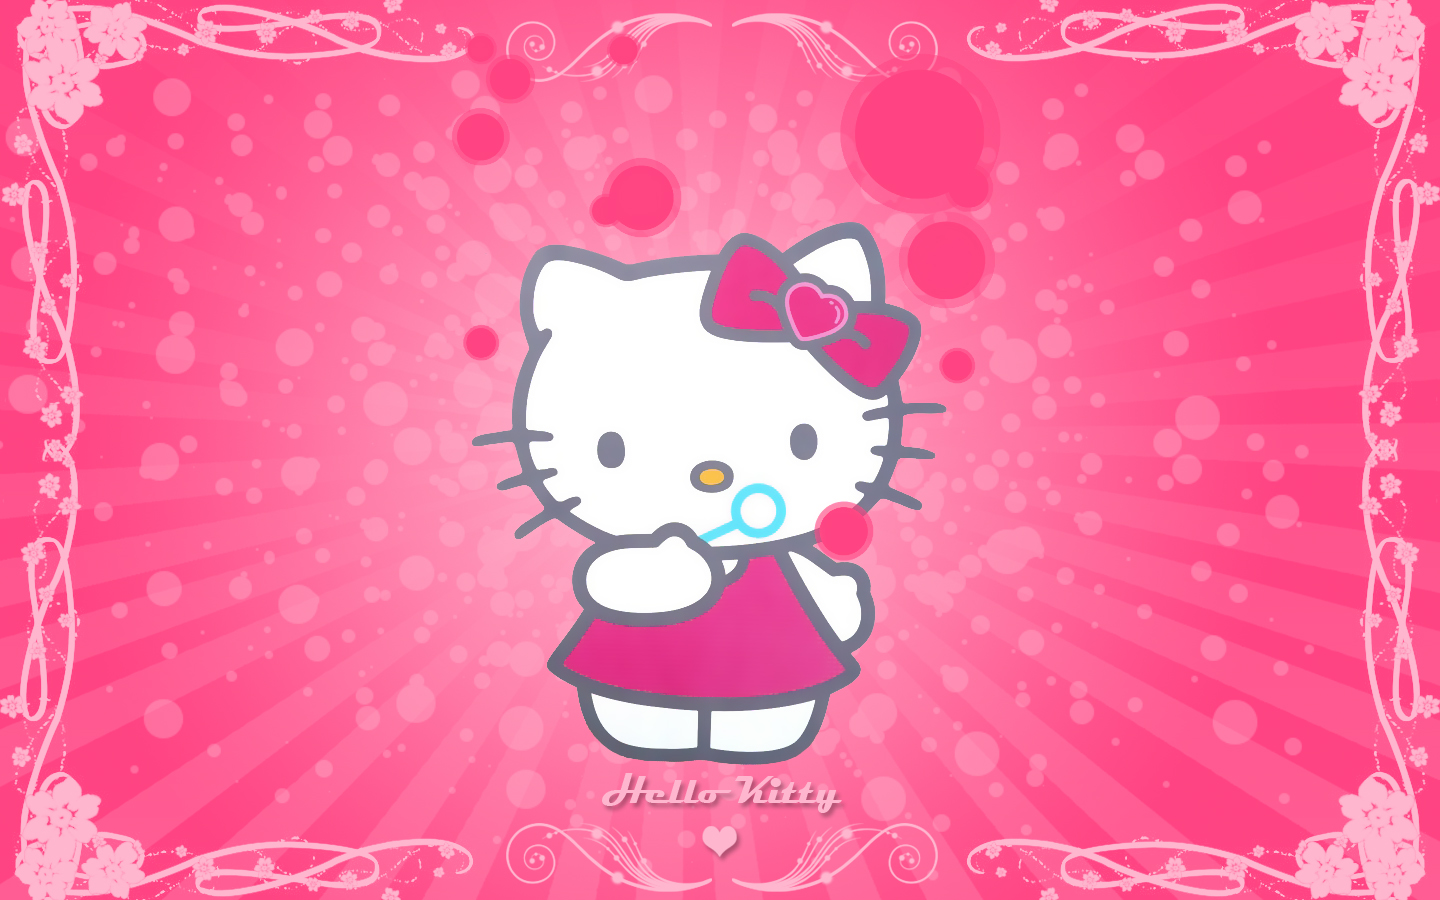 Free Pink Hello Kitty Square Background Vector - TitanUI